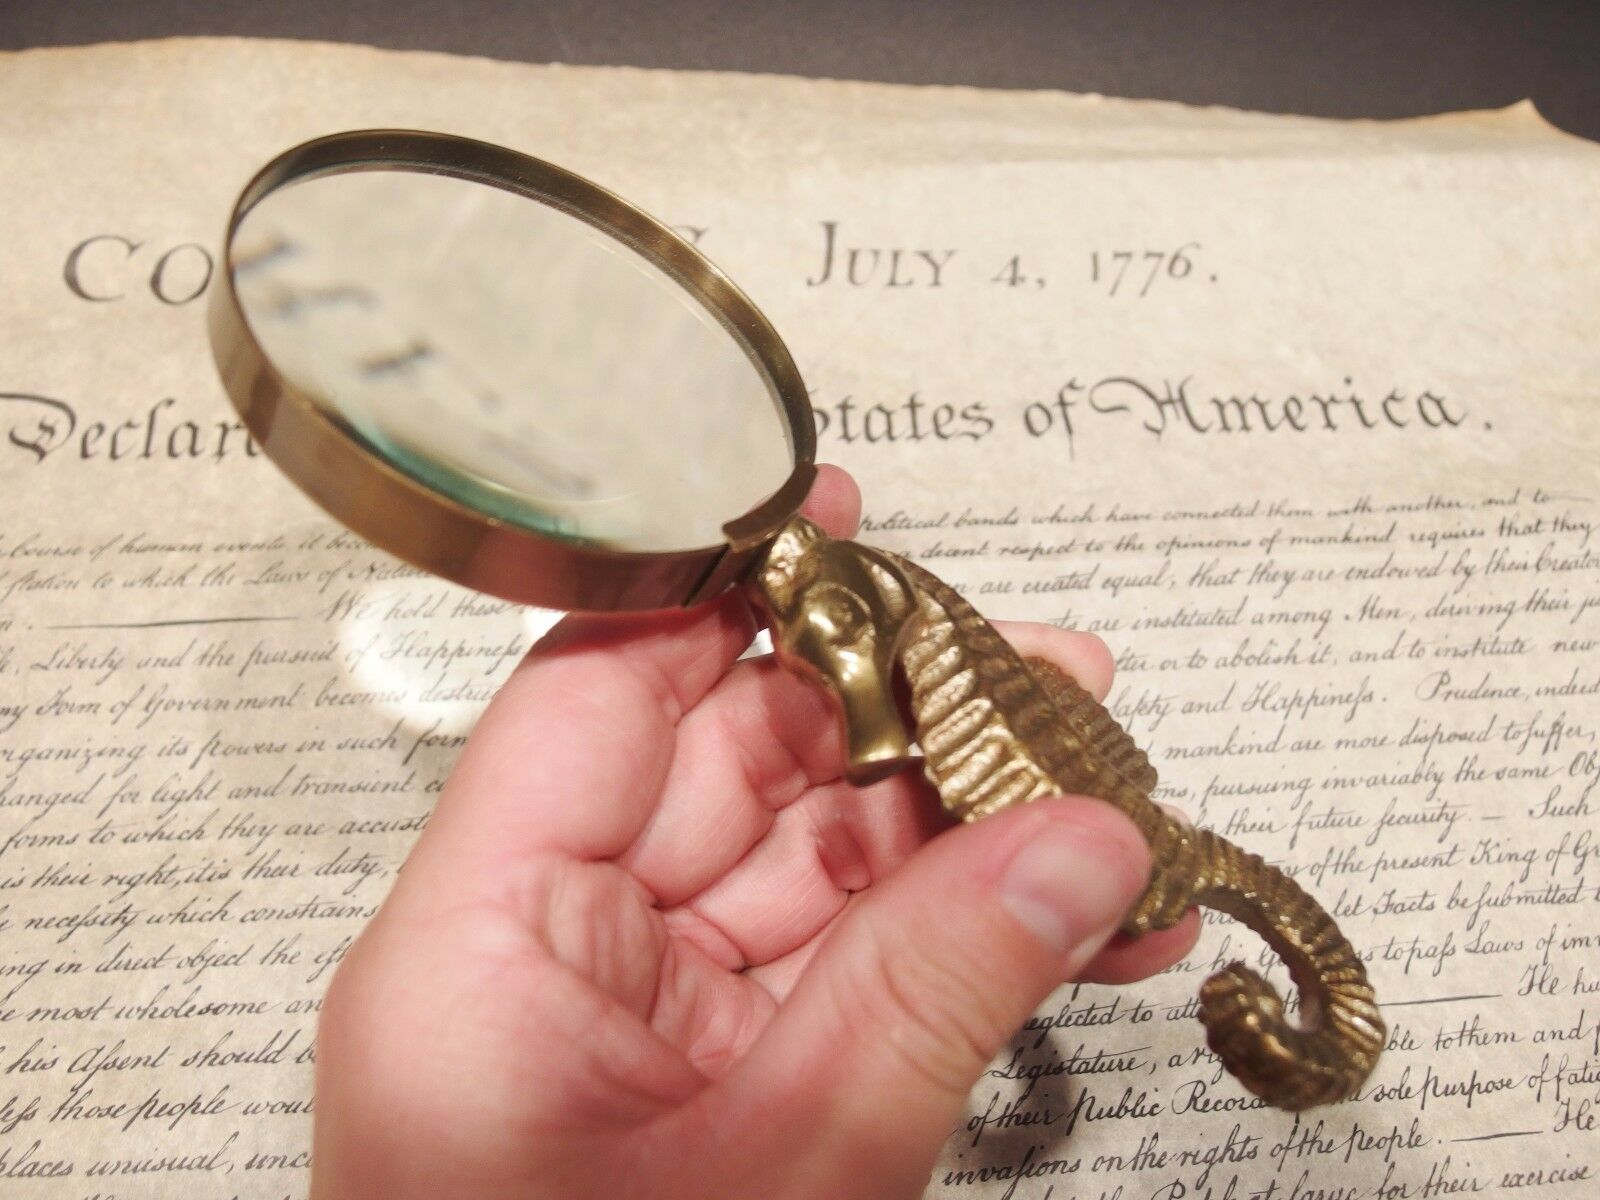 Vintage Antique Style Brass Seahorse Magnifying Glass Desk Hand Lens - Early Home Decor